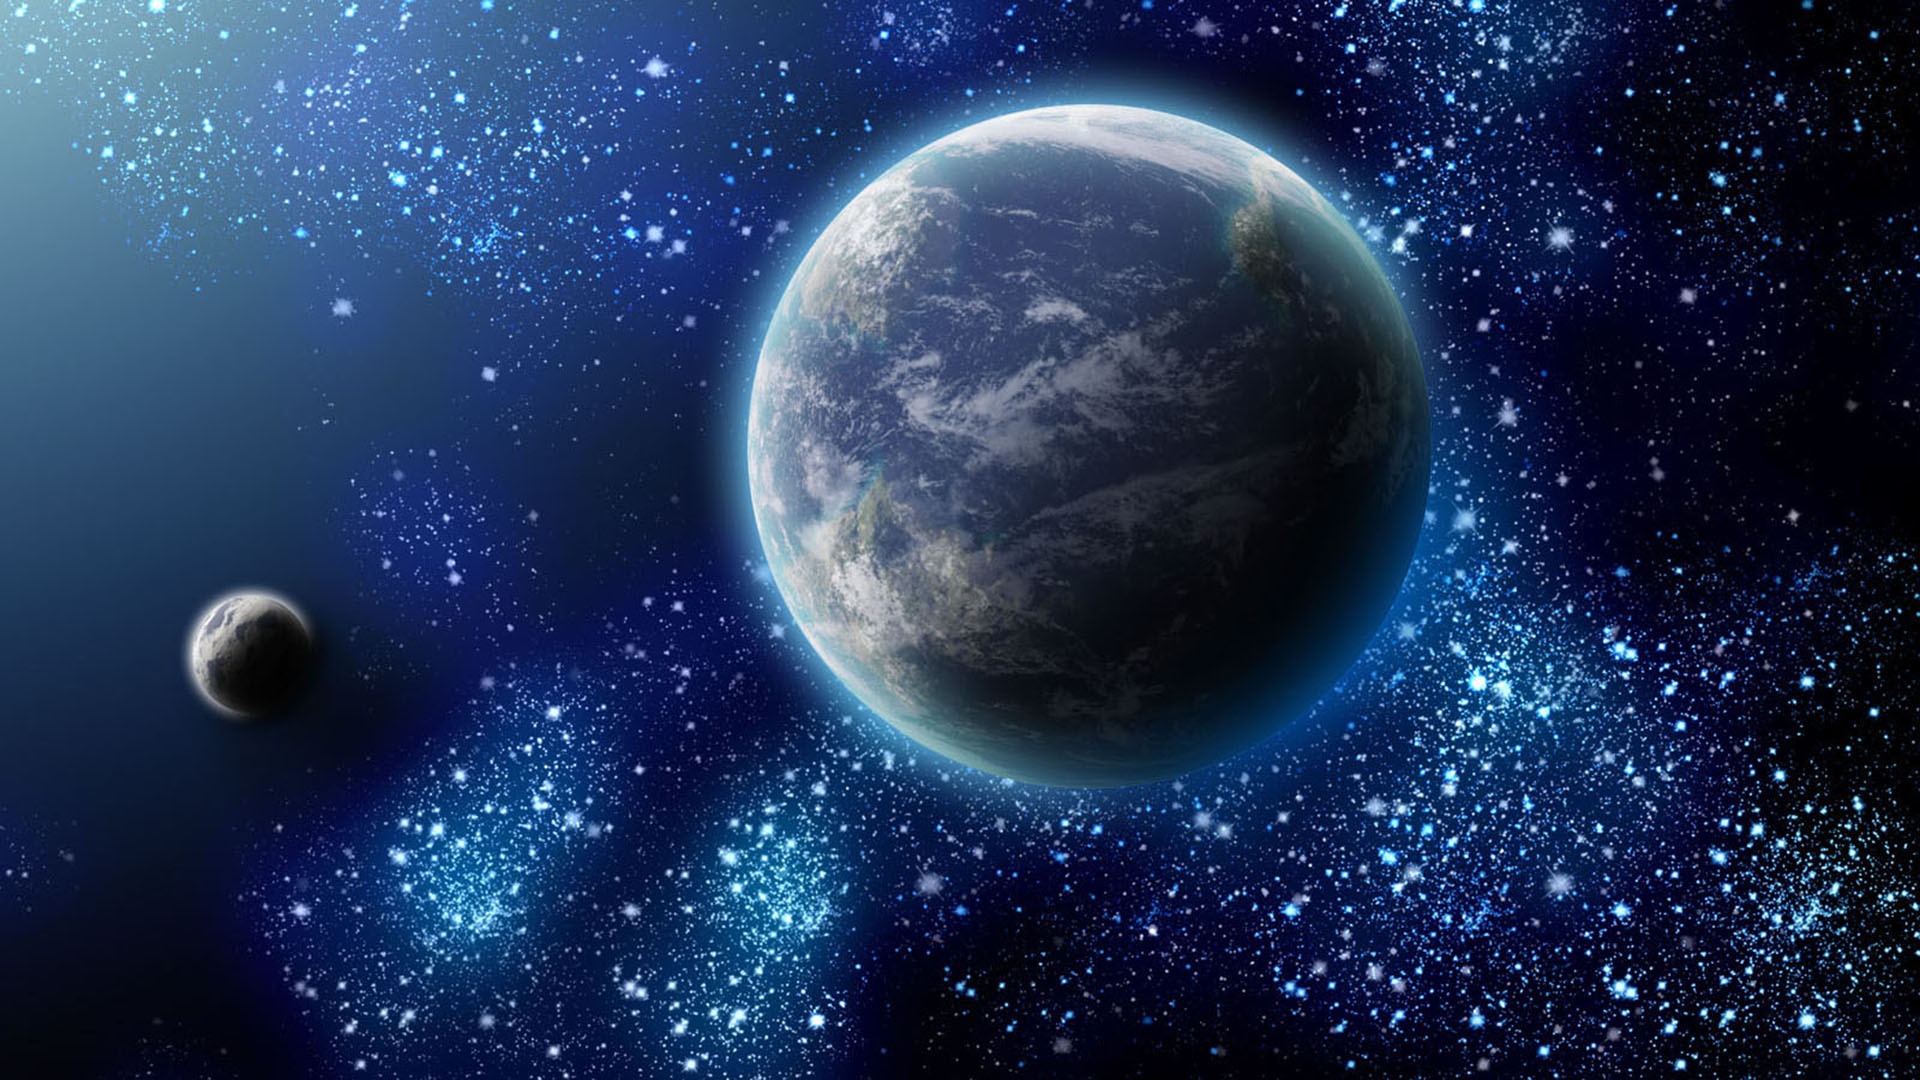 Cool Space Desktop Background Image Amp Pictures